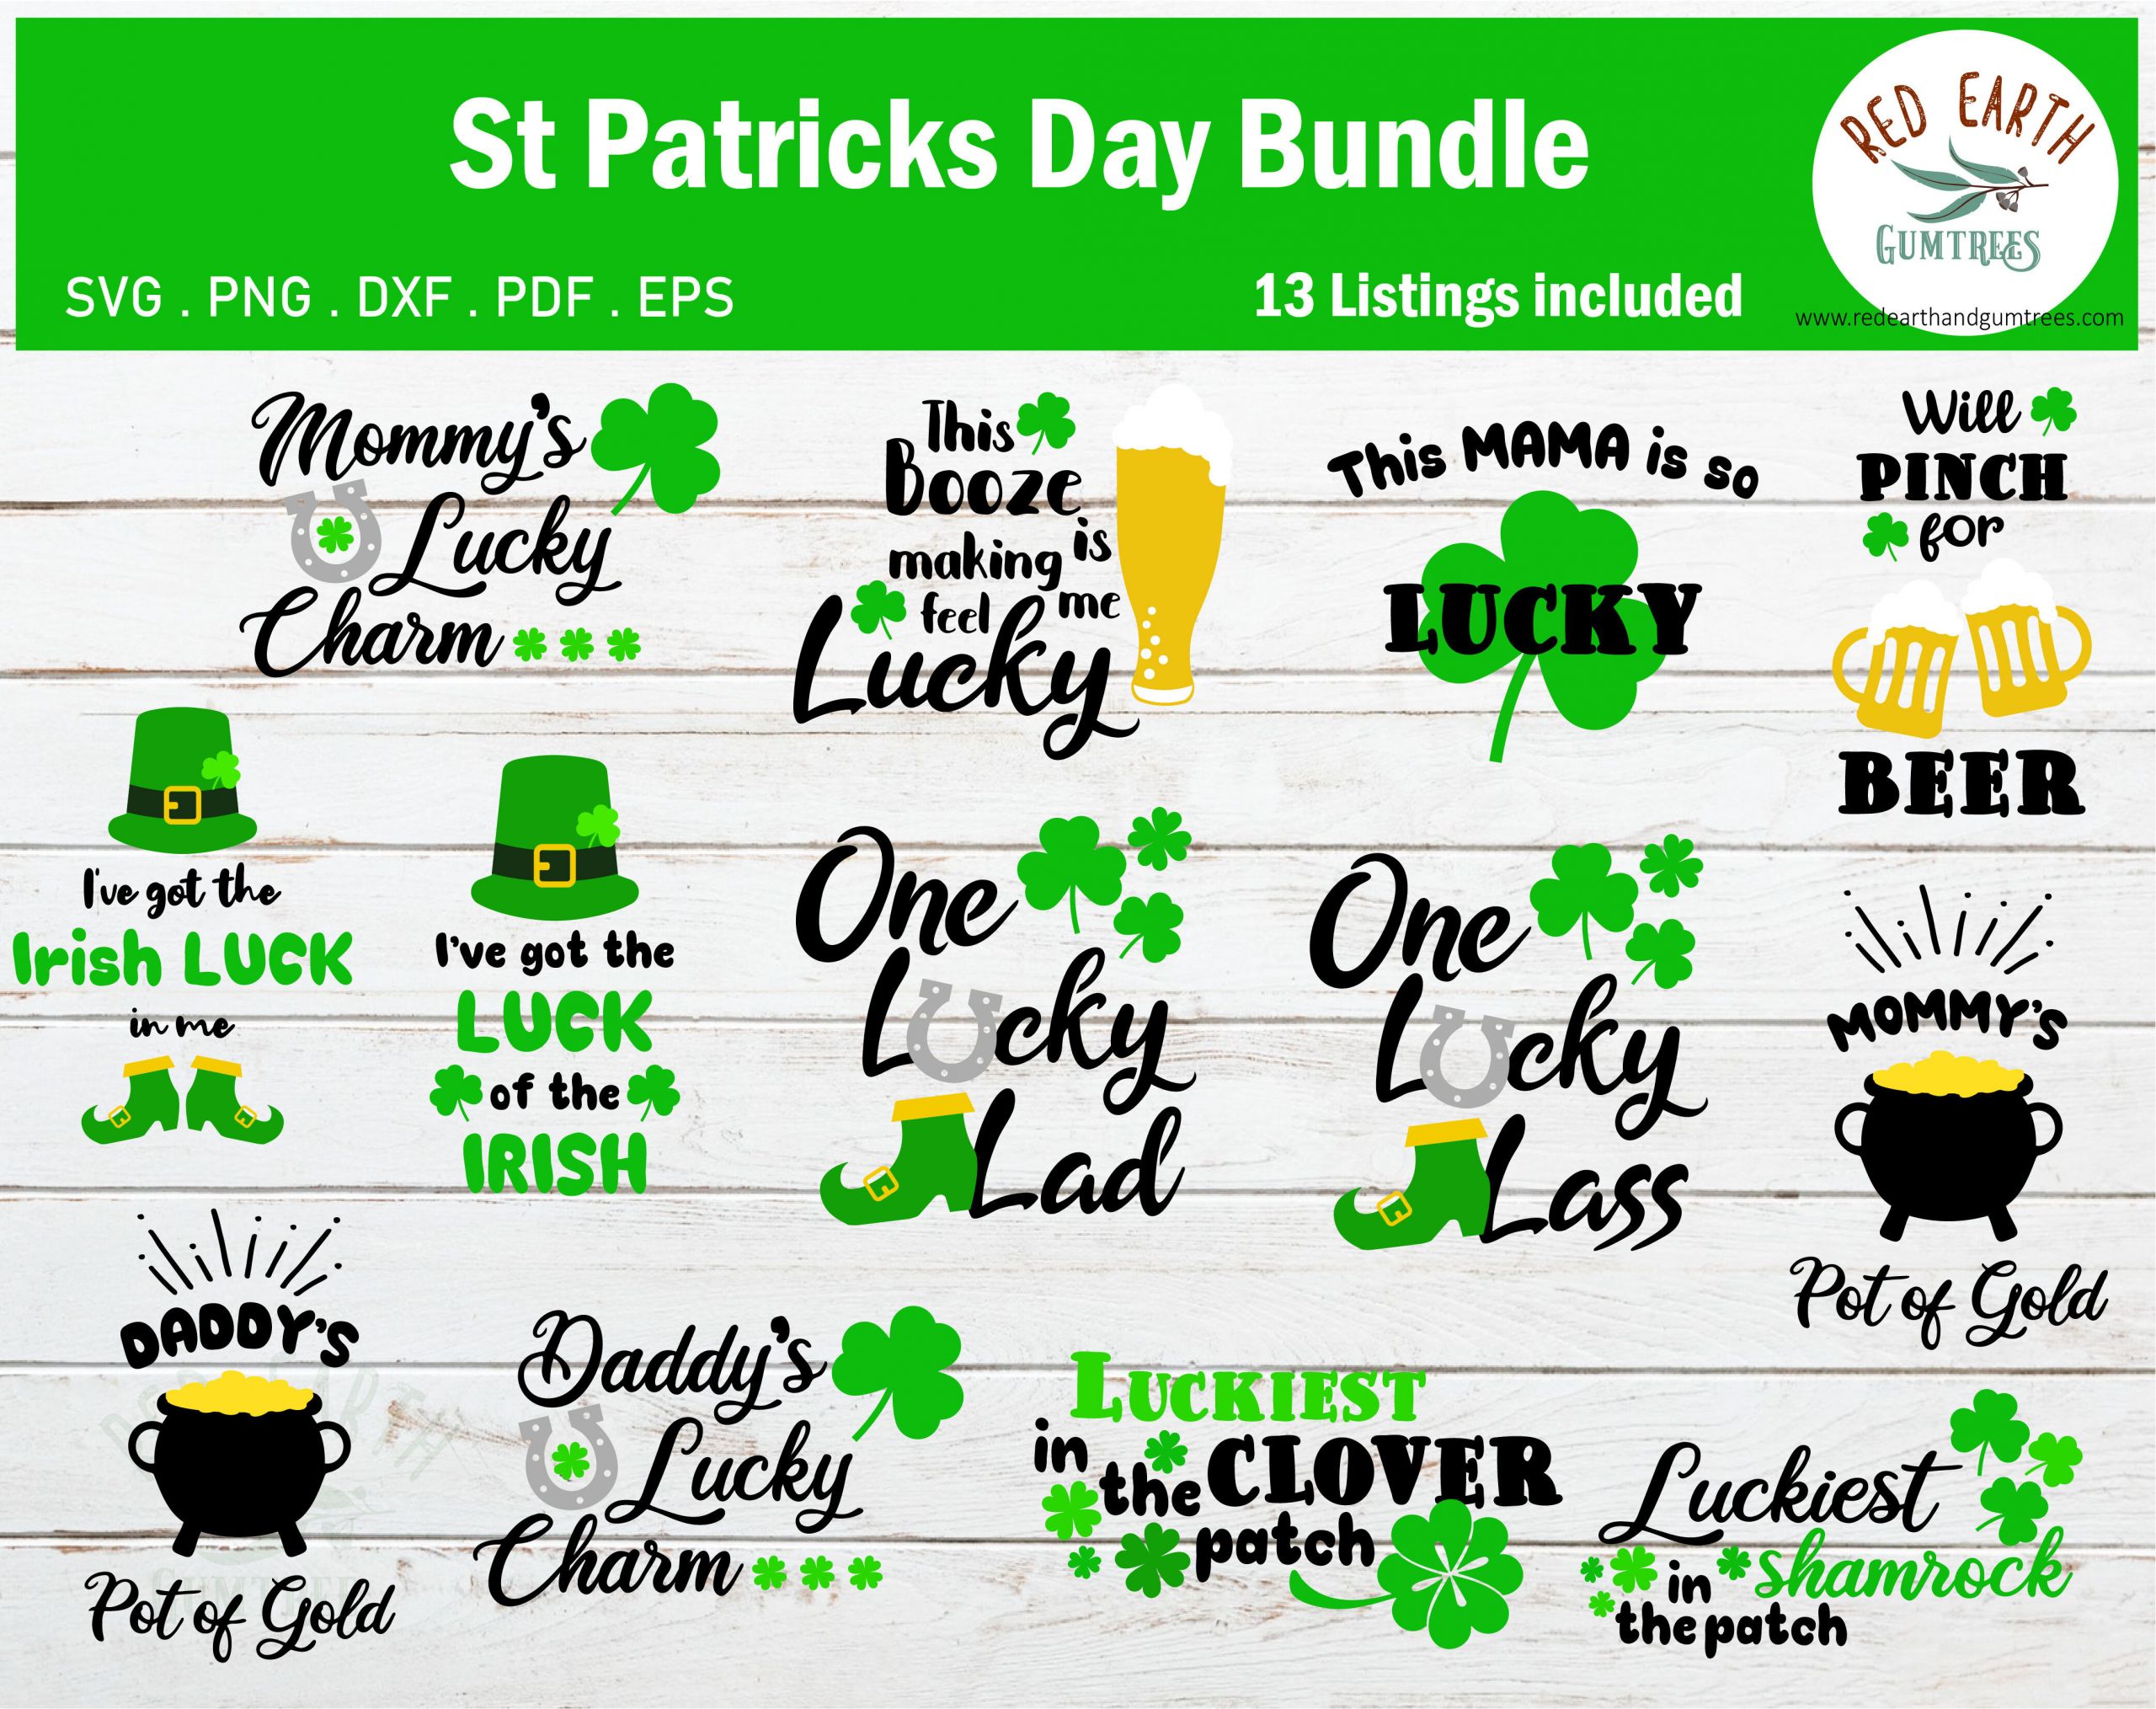 St Patrick's Day Quotes
 Funny St Patrick s day quotes and sayings SVG PNG DXF PDF